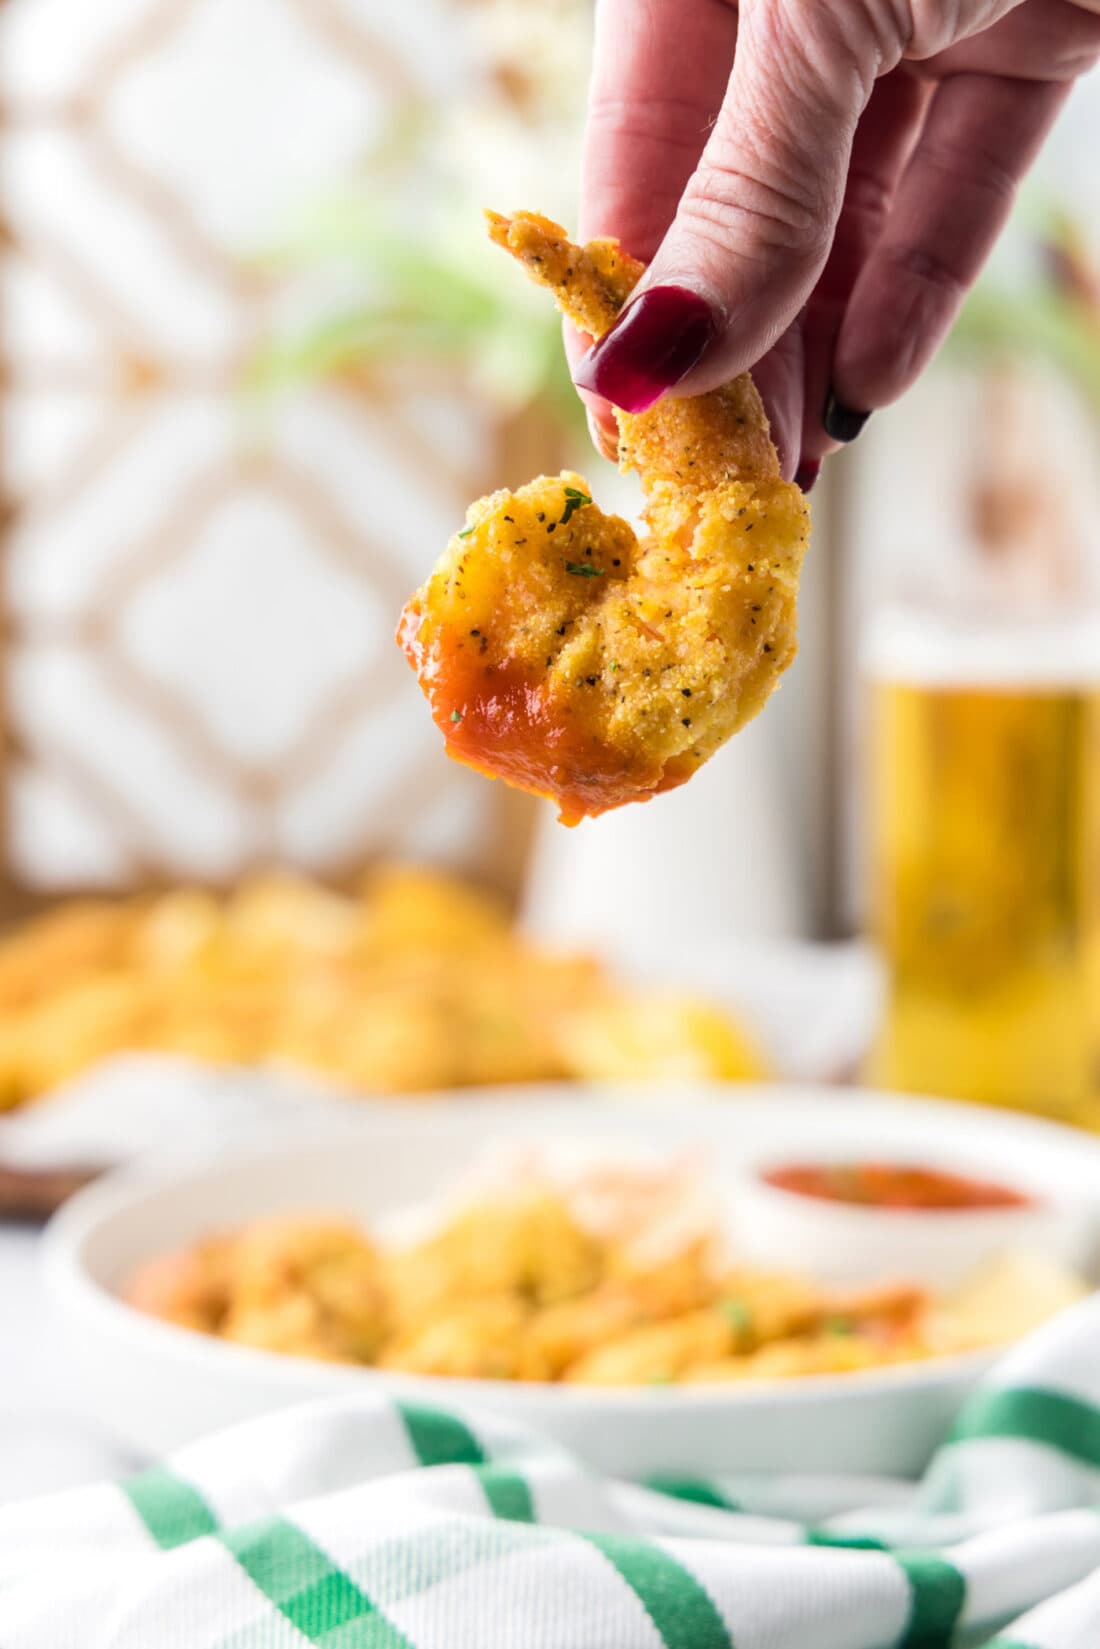 A hand holding a Fried Shrimp dipped in cocktail sauce